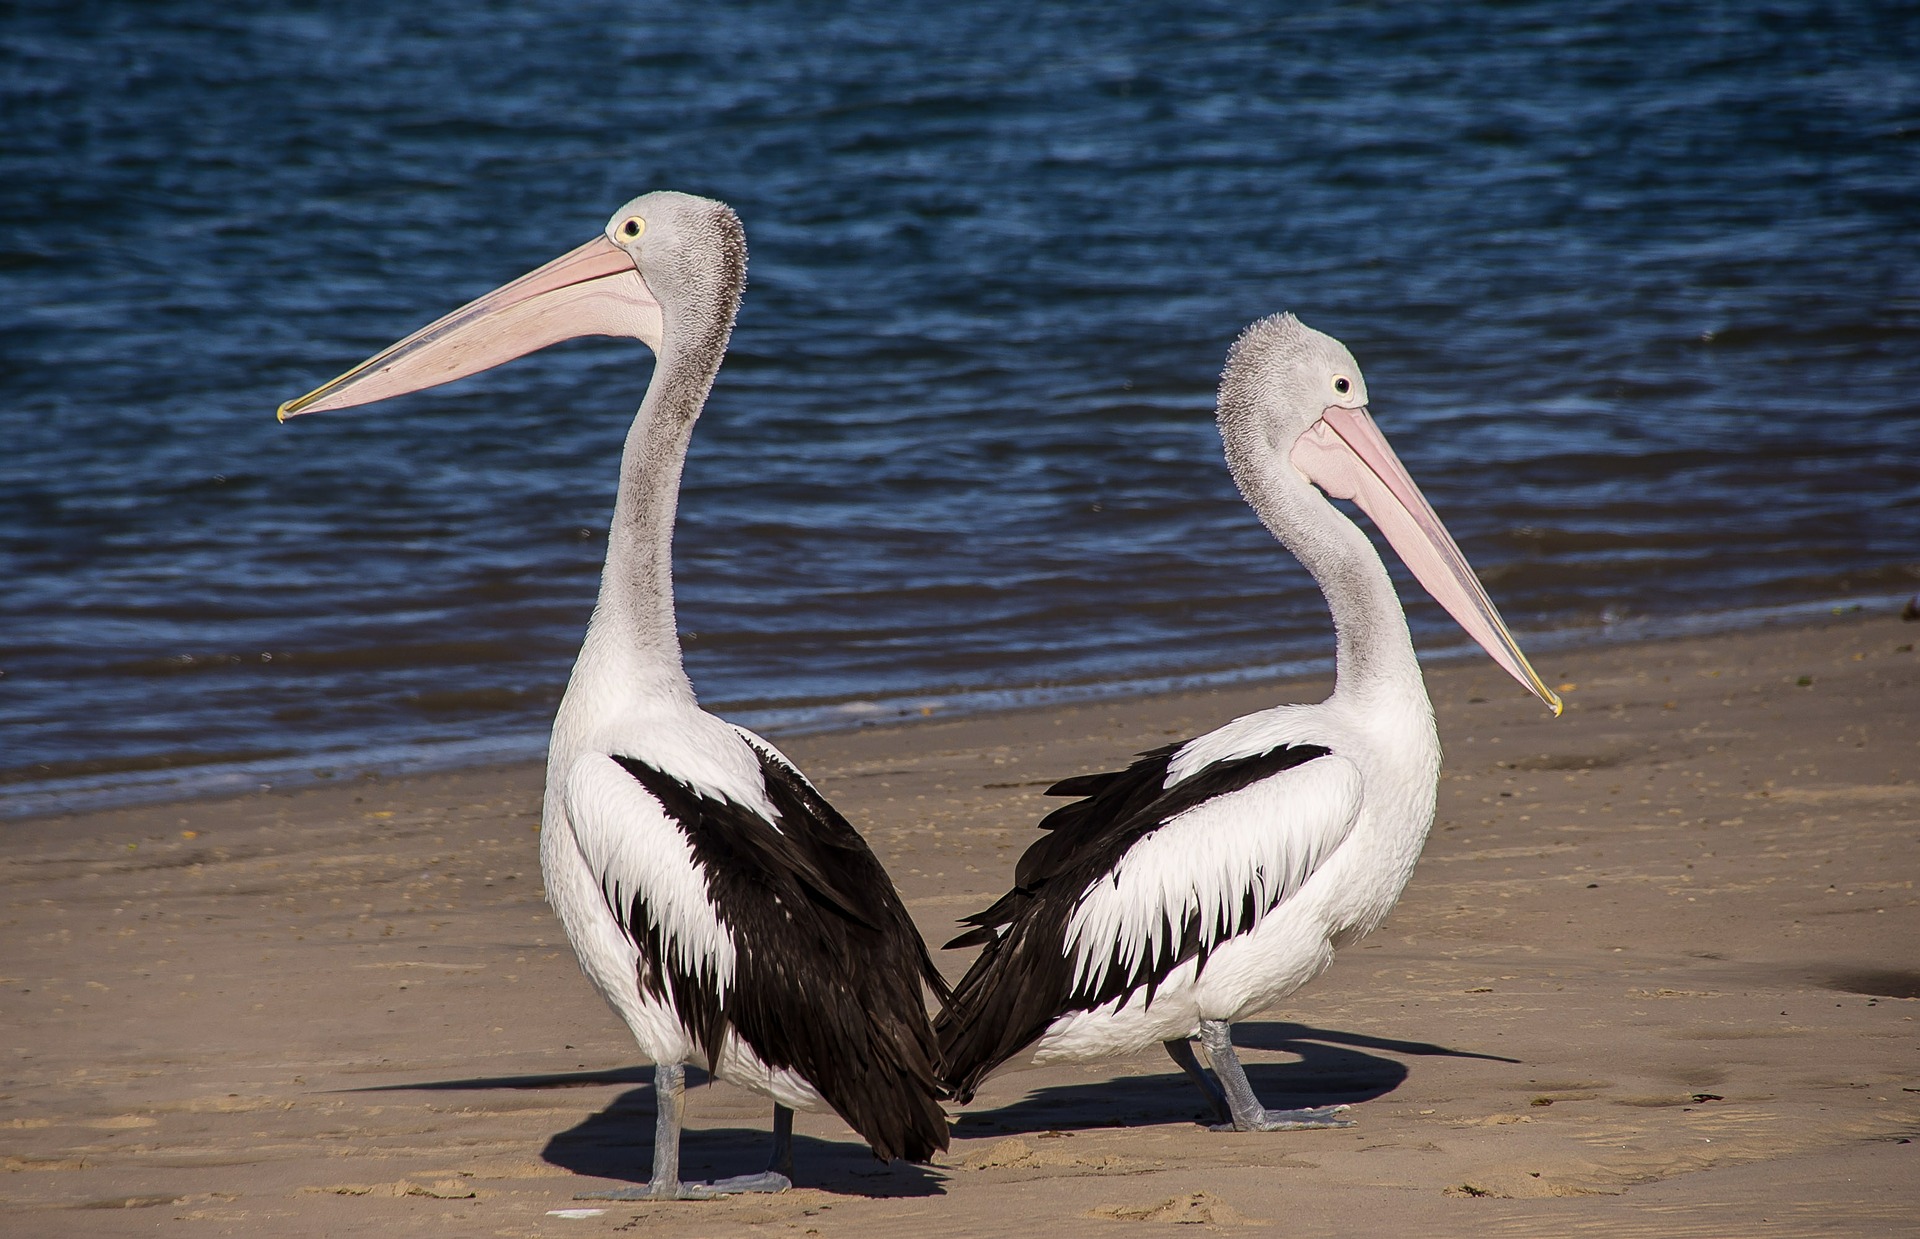 See amazing birds when you embark on sightseeing in Orange Beach